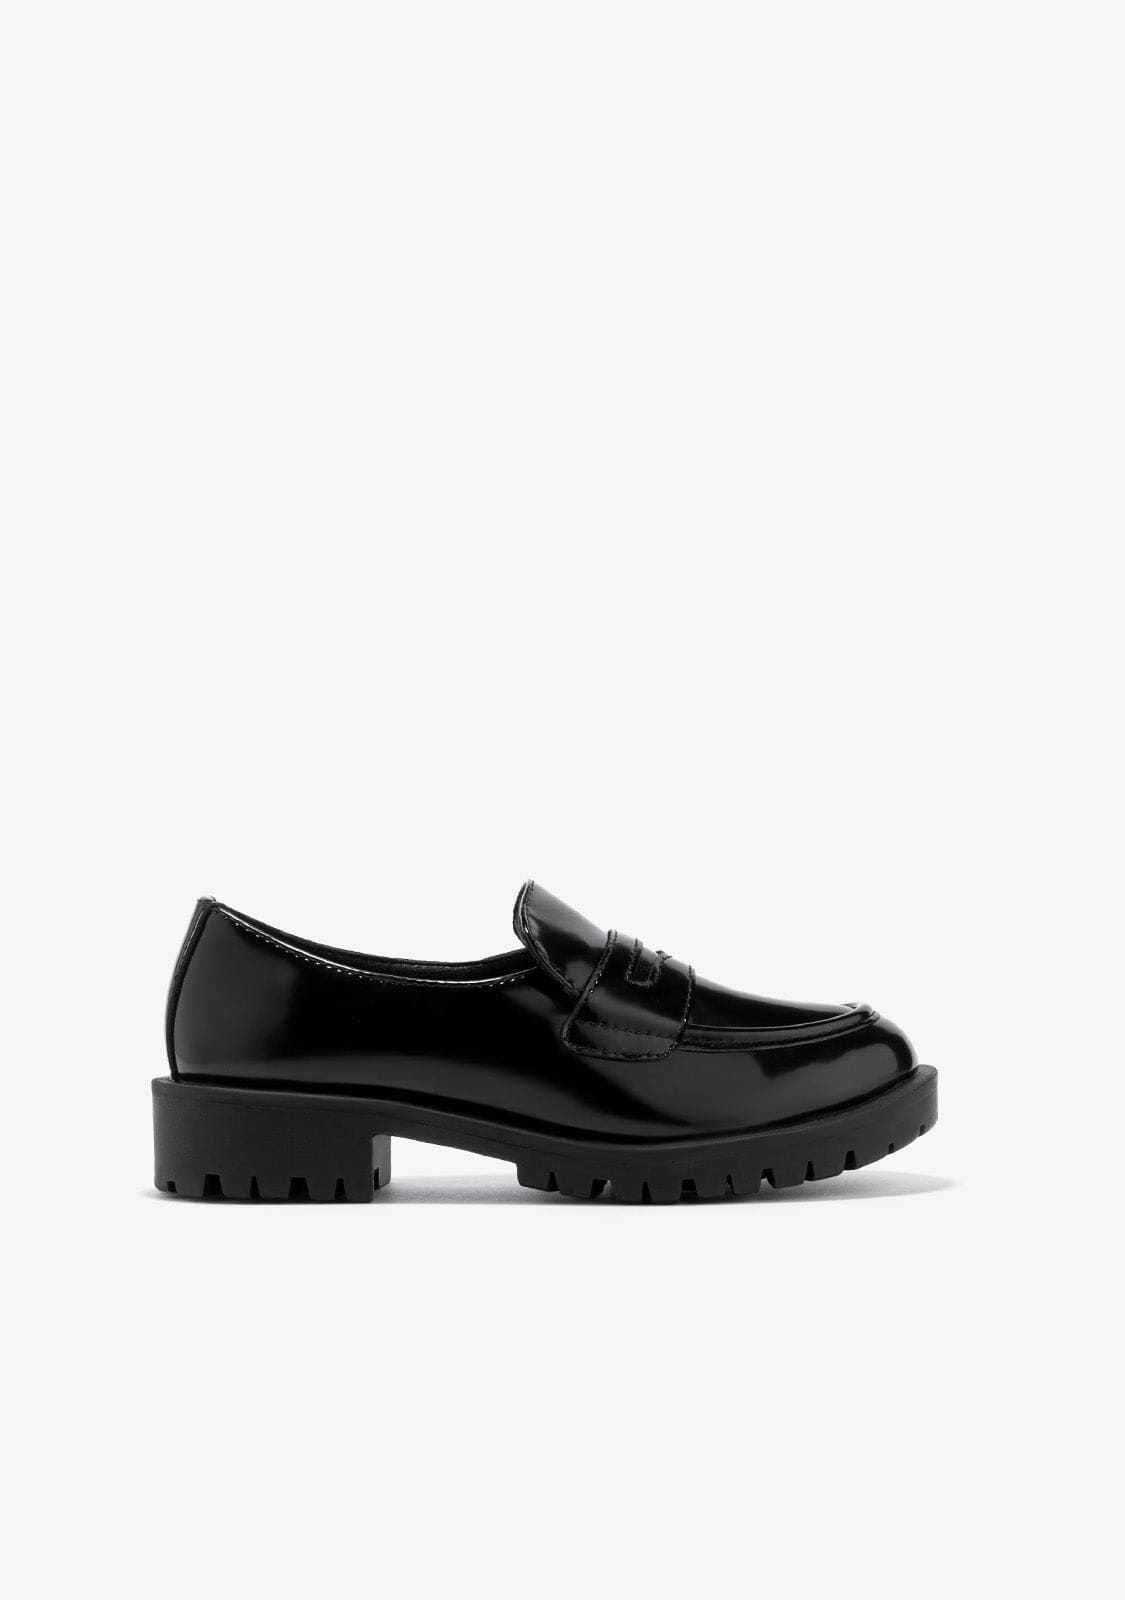 B&W JUNIOR Shoes Girl's Black Loafers B&W